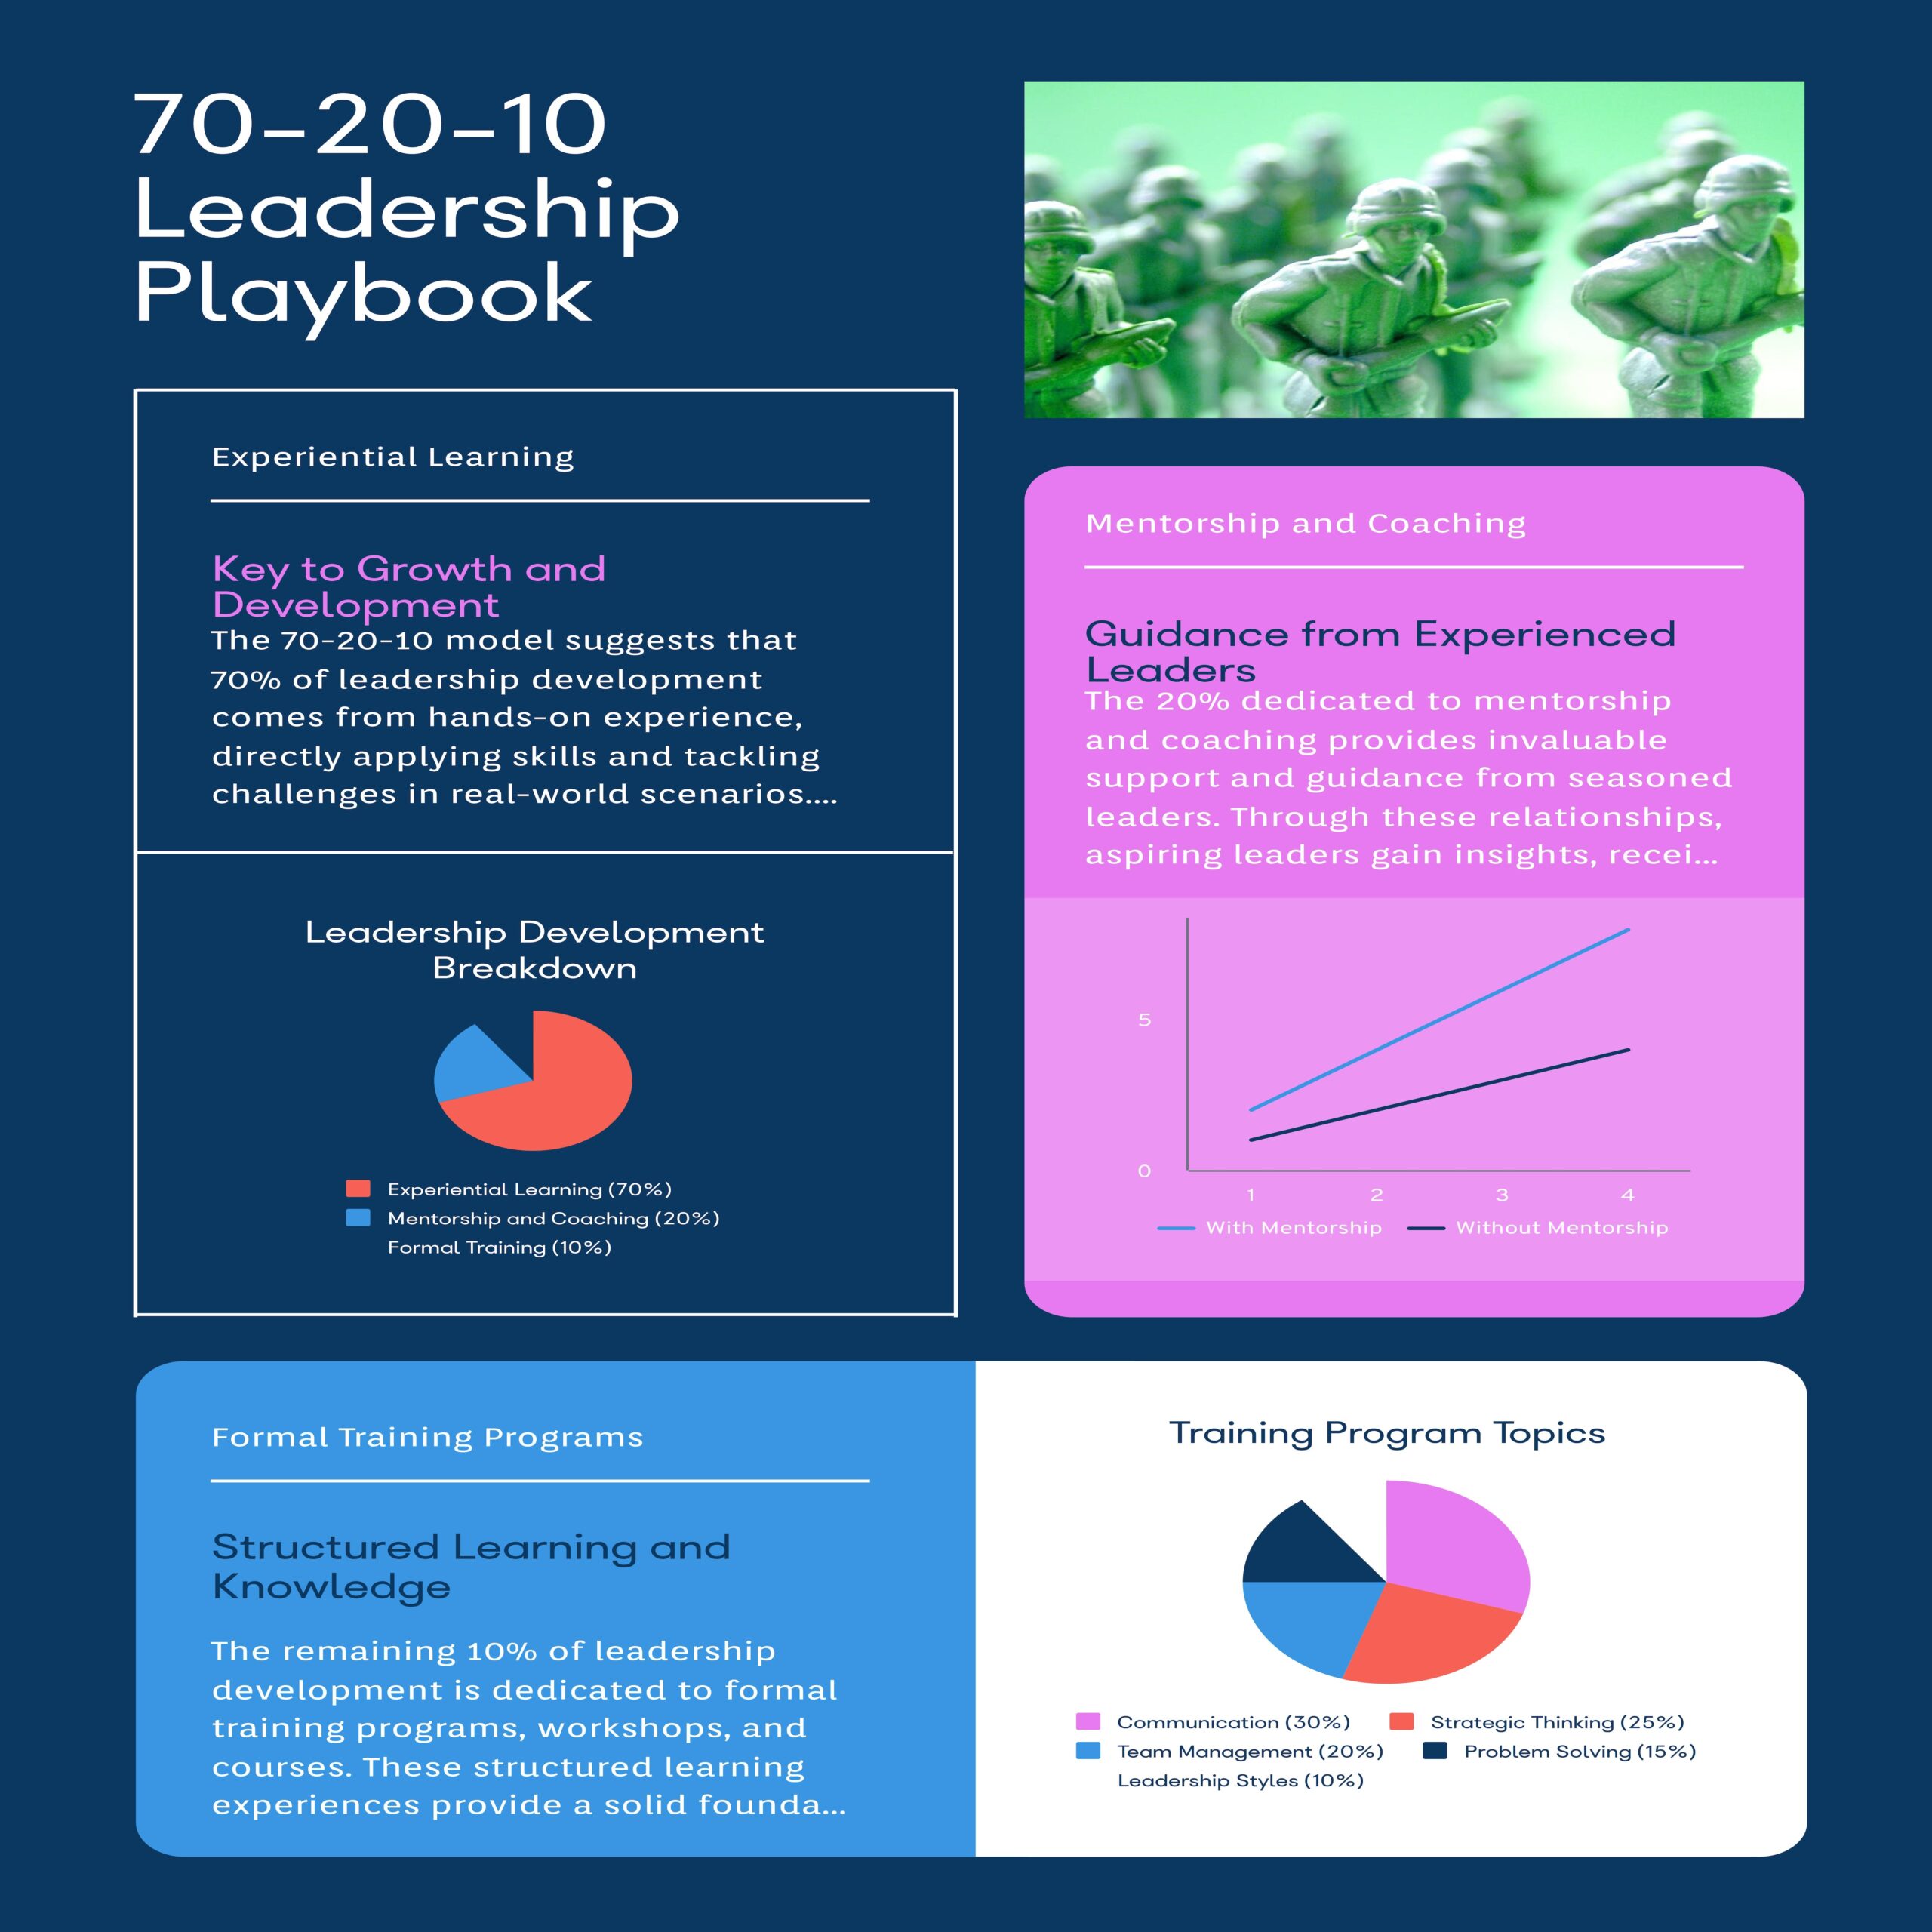 The 70-20-10 Leadership Playbook: Practical Strategies for Professionals